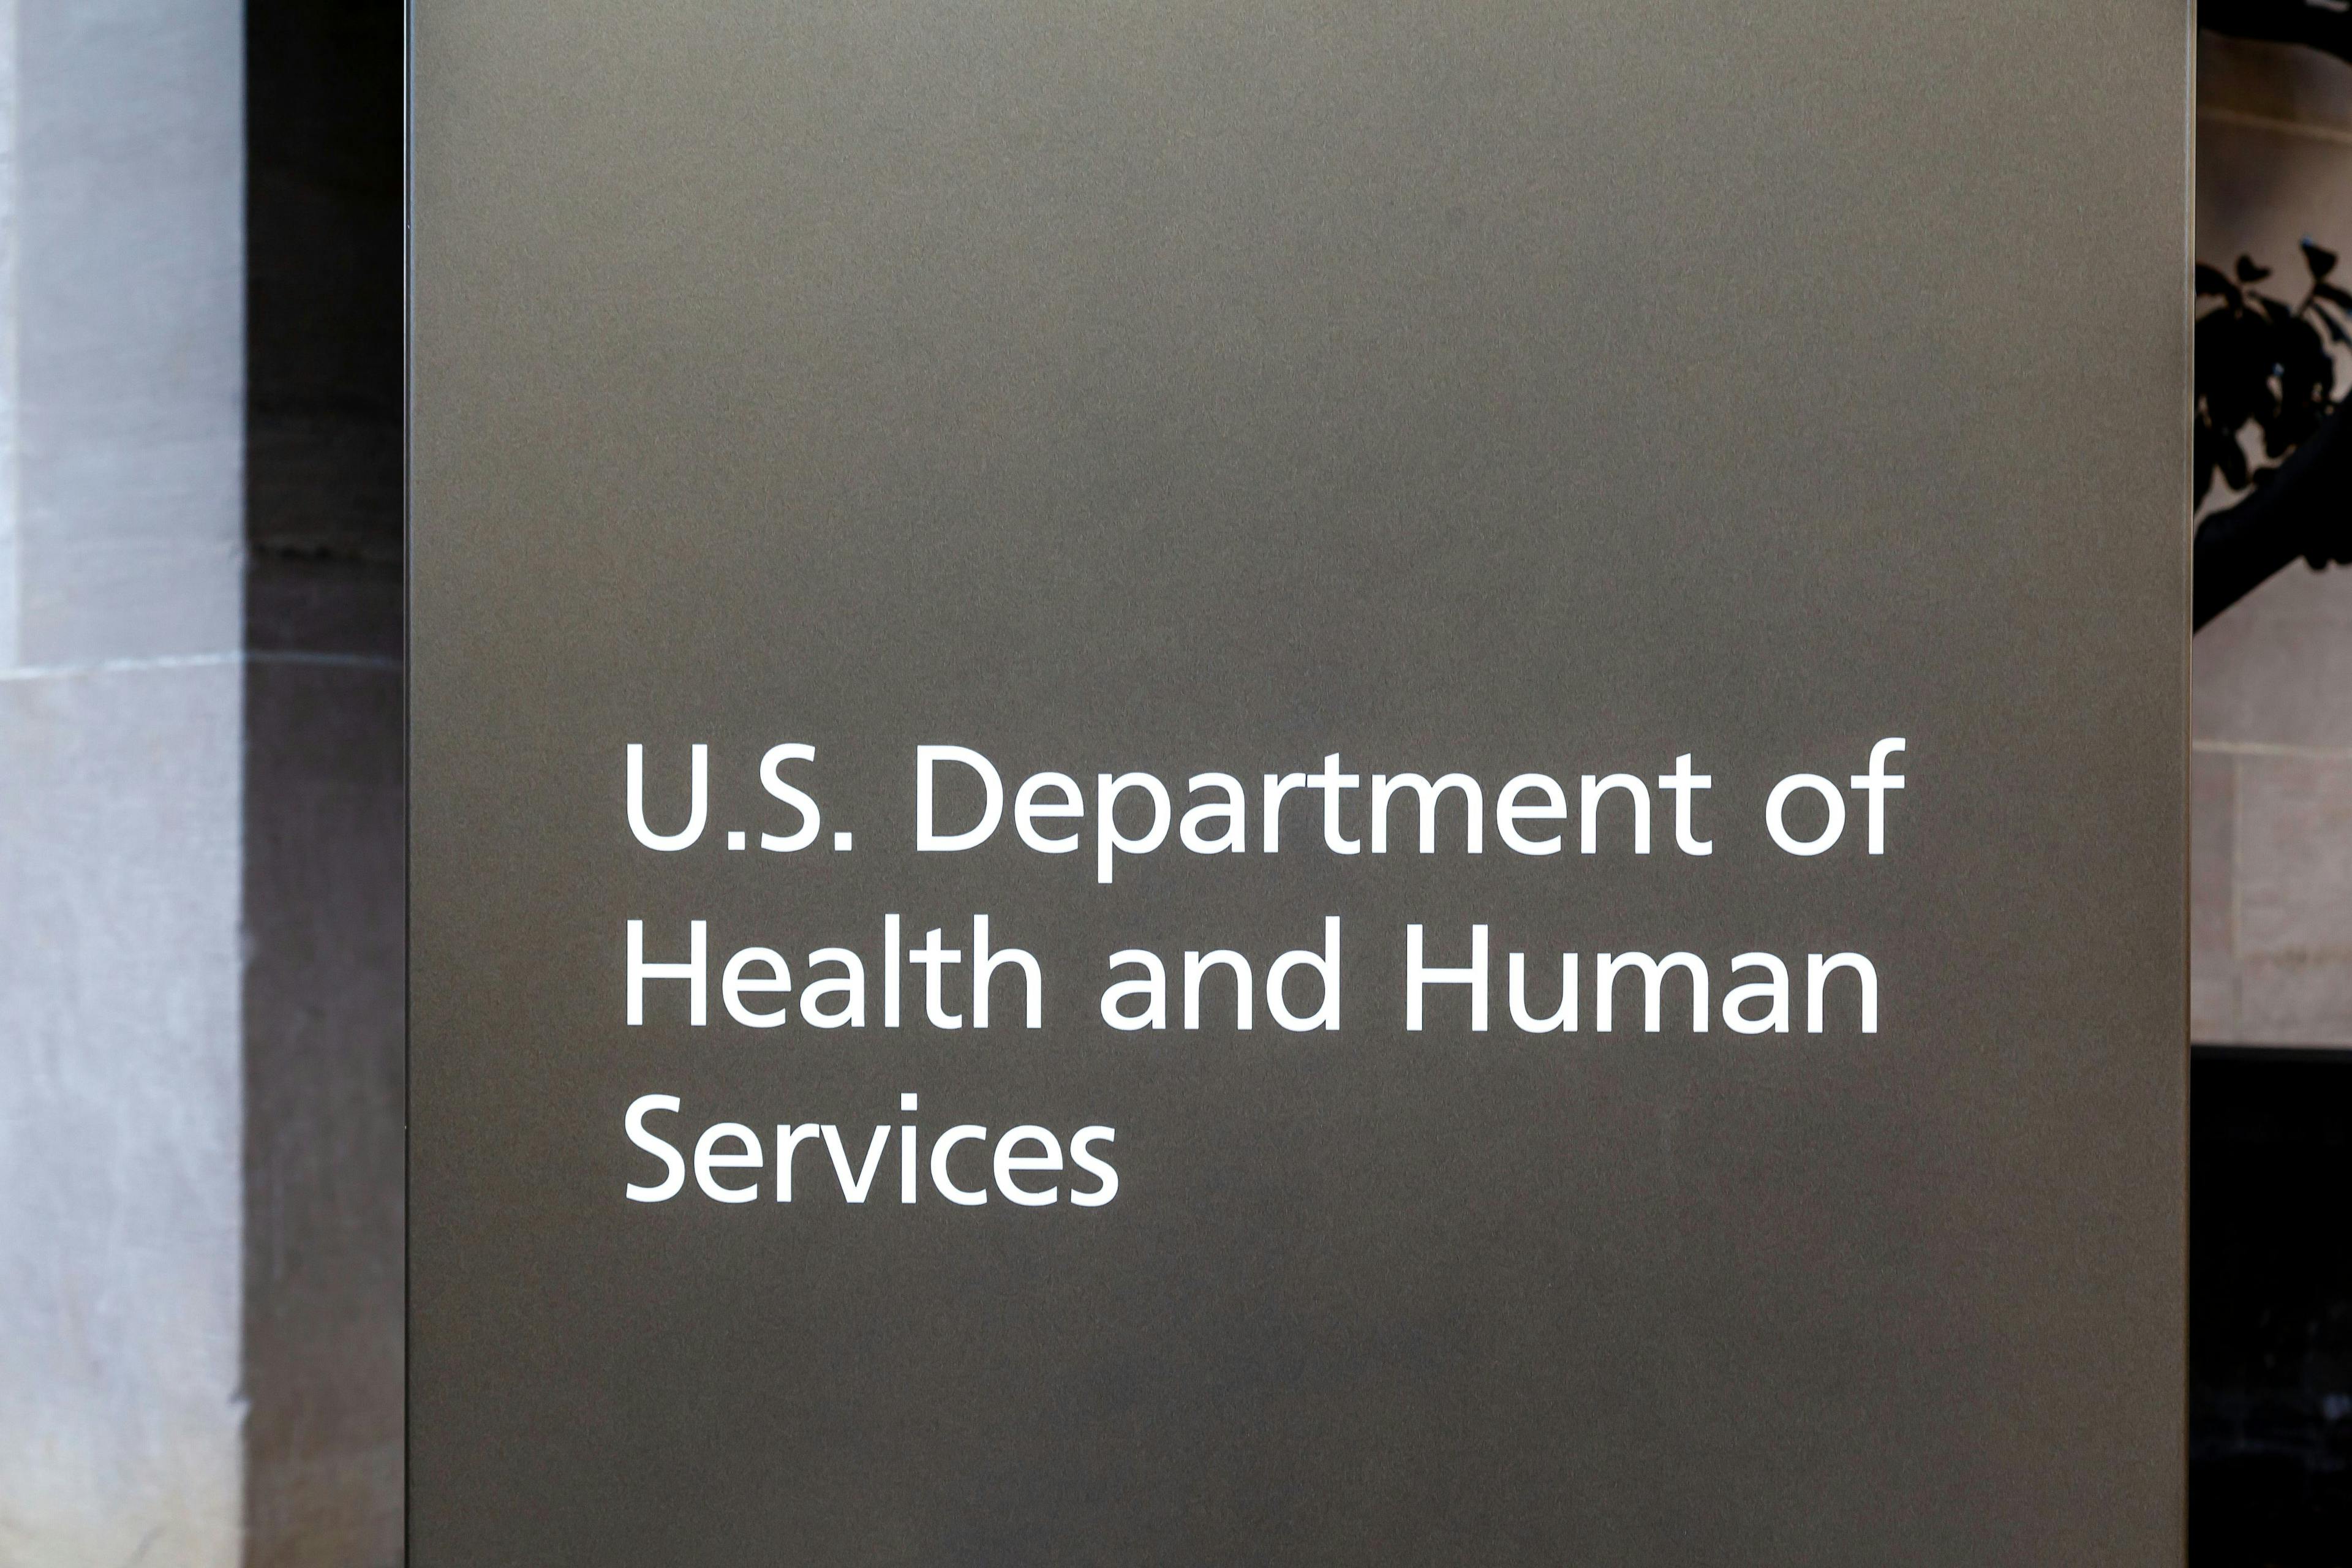 Sign of US Department of Health & Human Services at its headquarters in Washington, D.C. / JHVEPhoto - stock.adobe.com